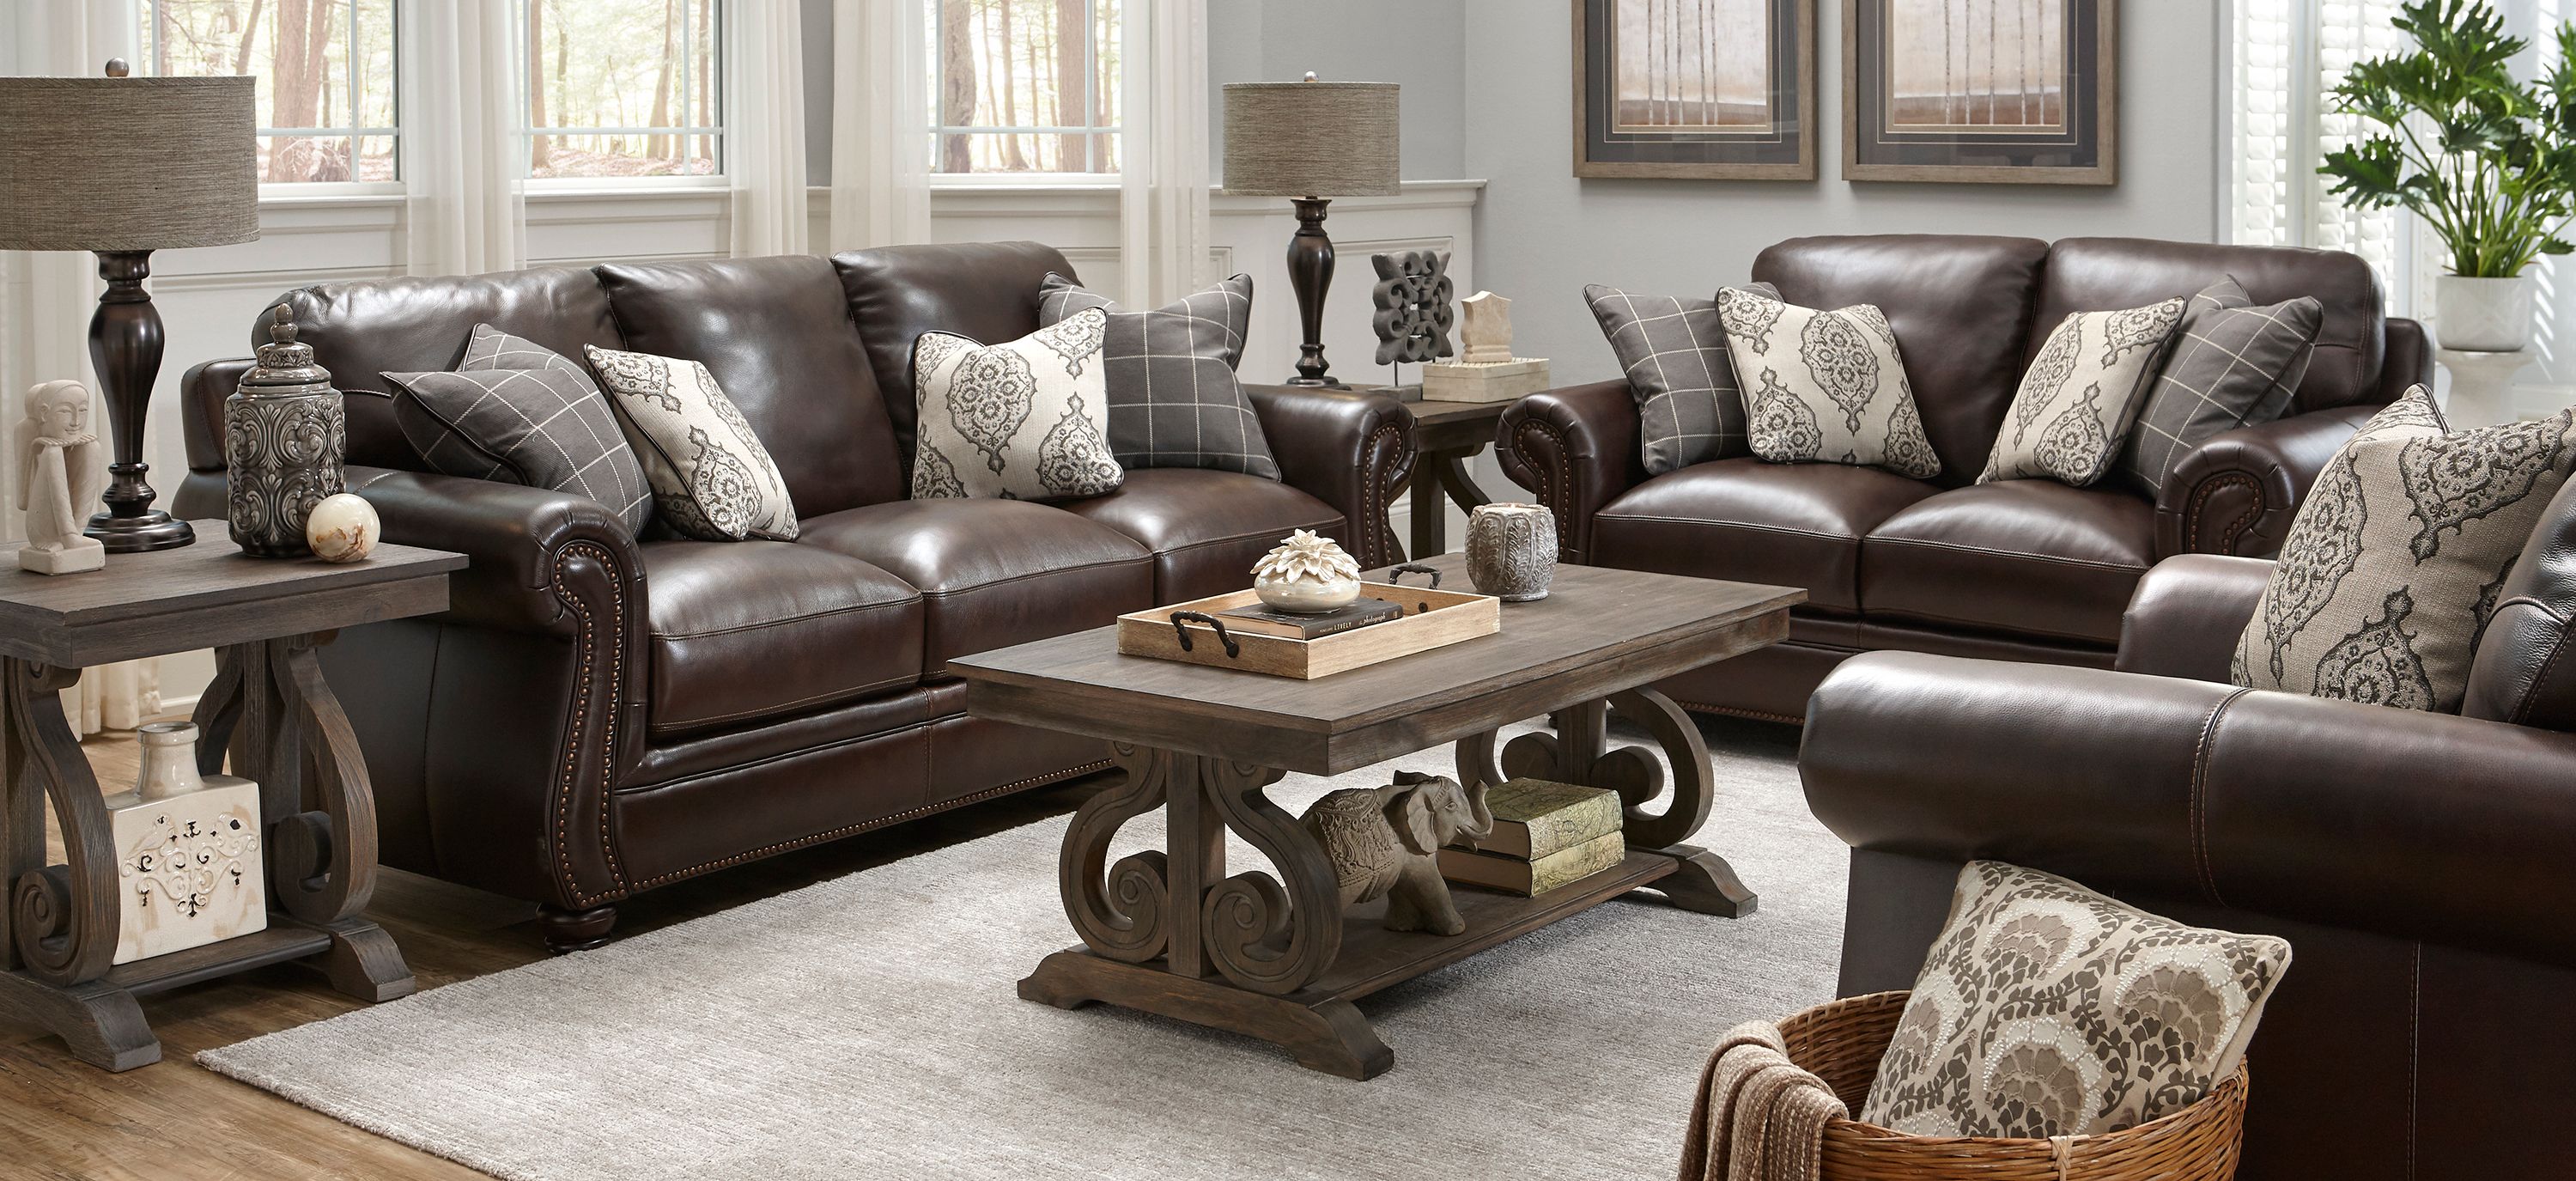 Alistair 2-pc. Leather Sofa and Loveseat Set